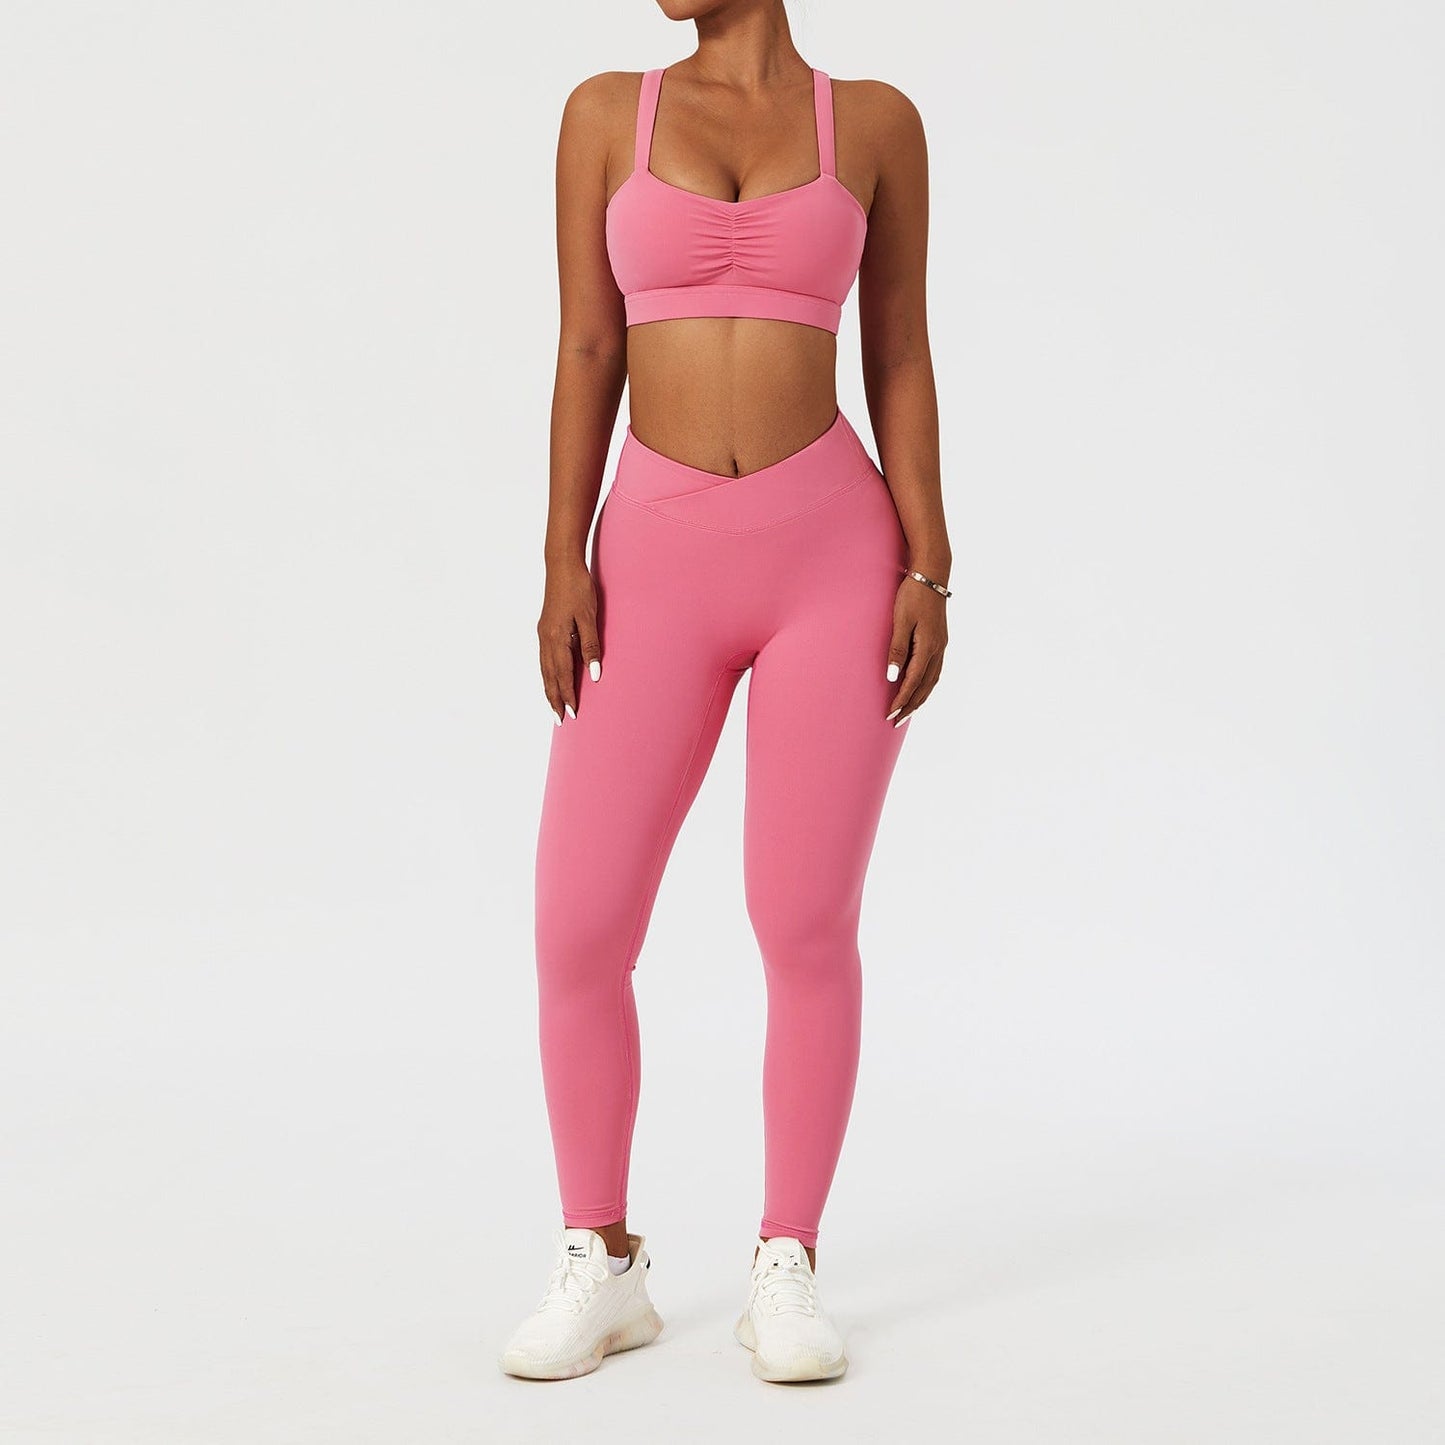 Women 2 Piece Quick Dry Jogging Training Wear Breathable Gym Fitness Sets Alpha C Apparel L / Pink style 1